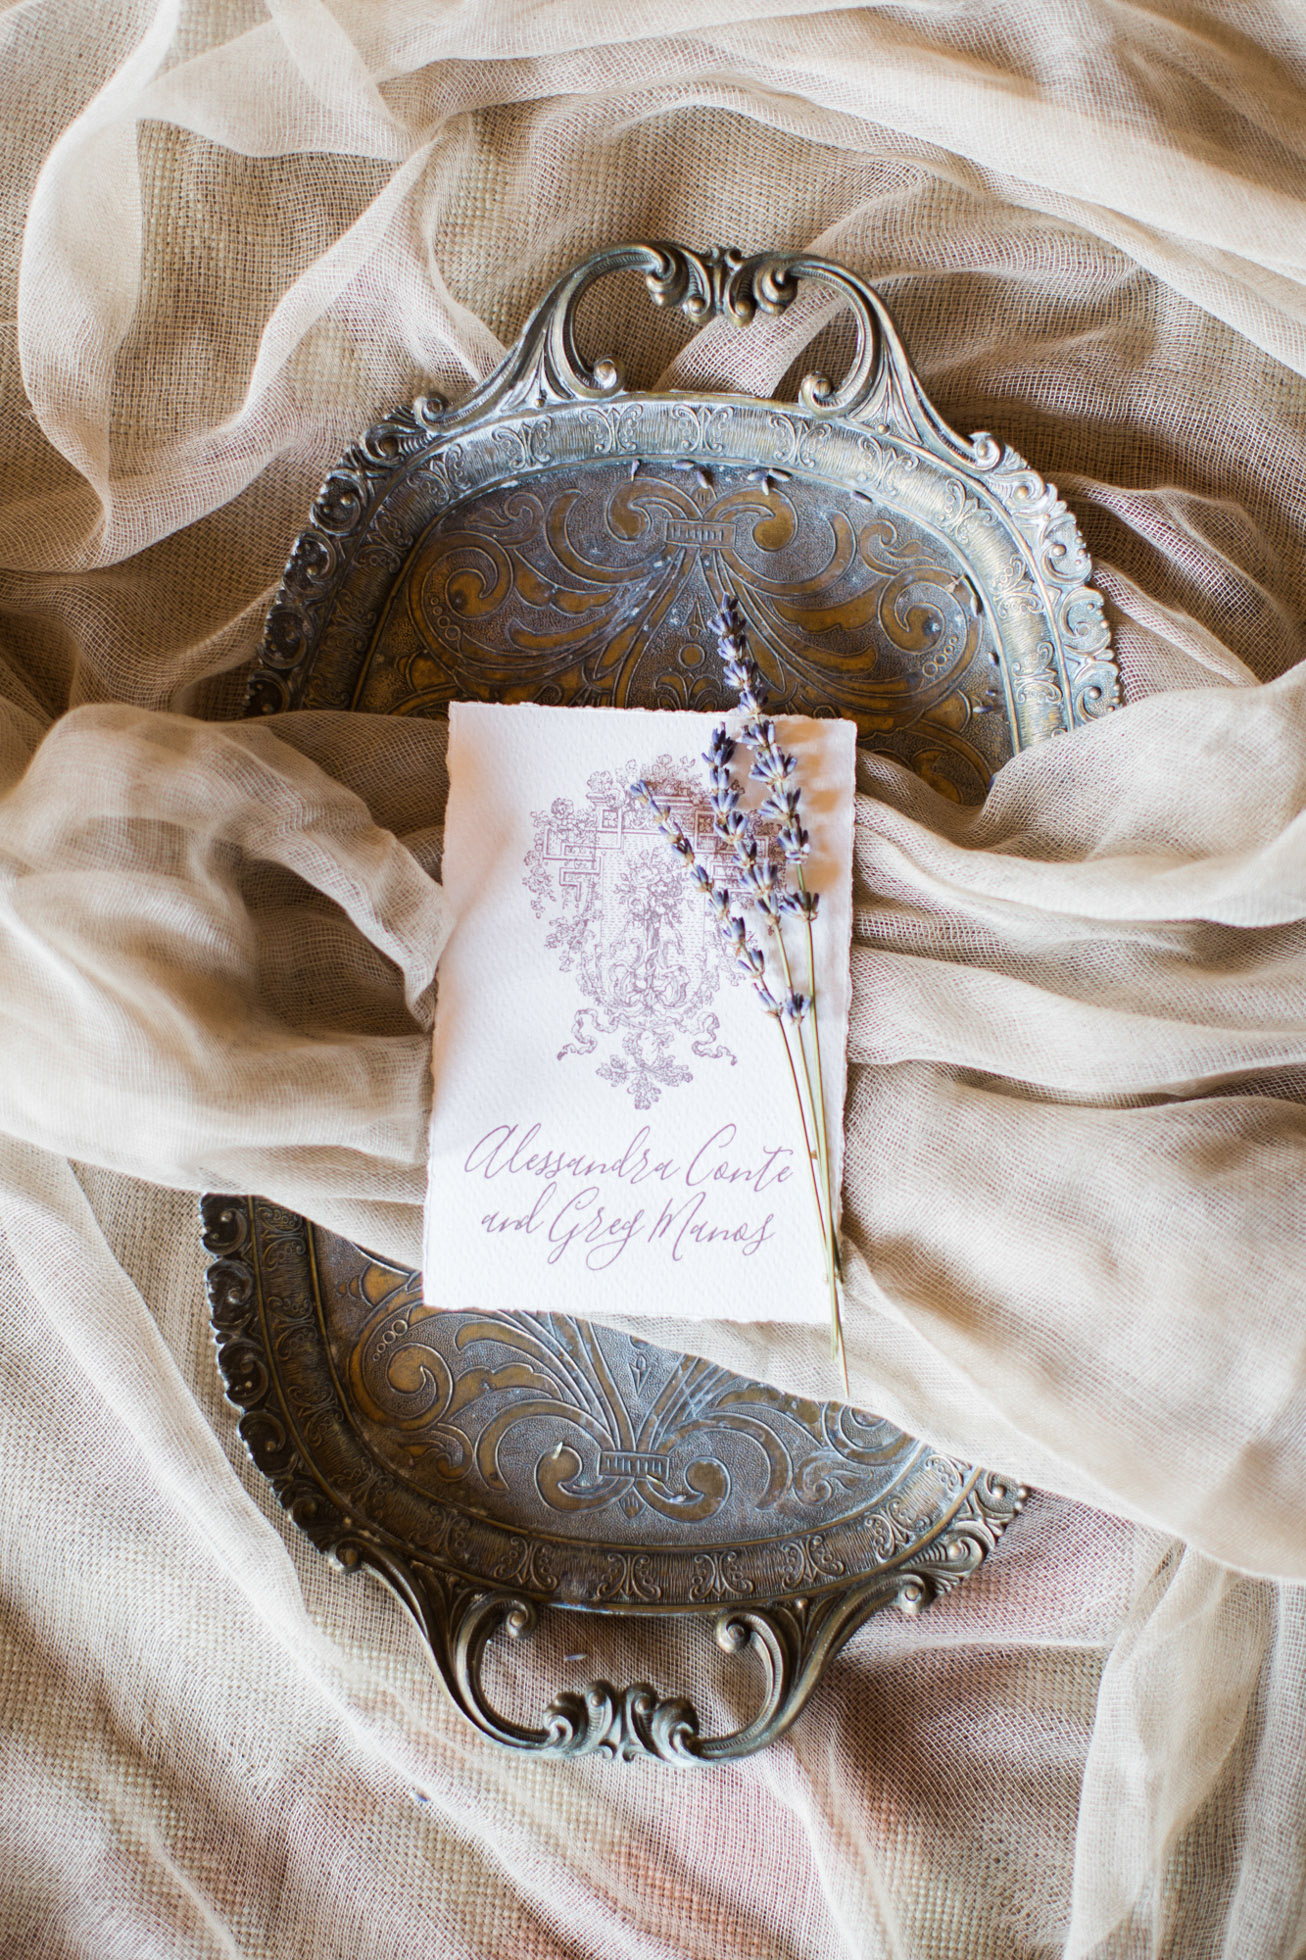 Beautiful intricate wedding invitation calligraphy styled by professional photographer and designer for bride and groom and photographed on vintage textures and fabrics.